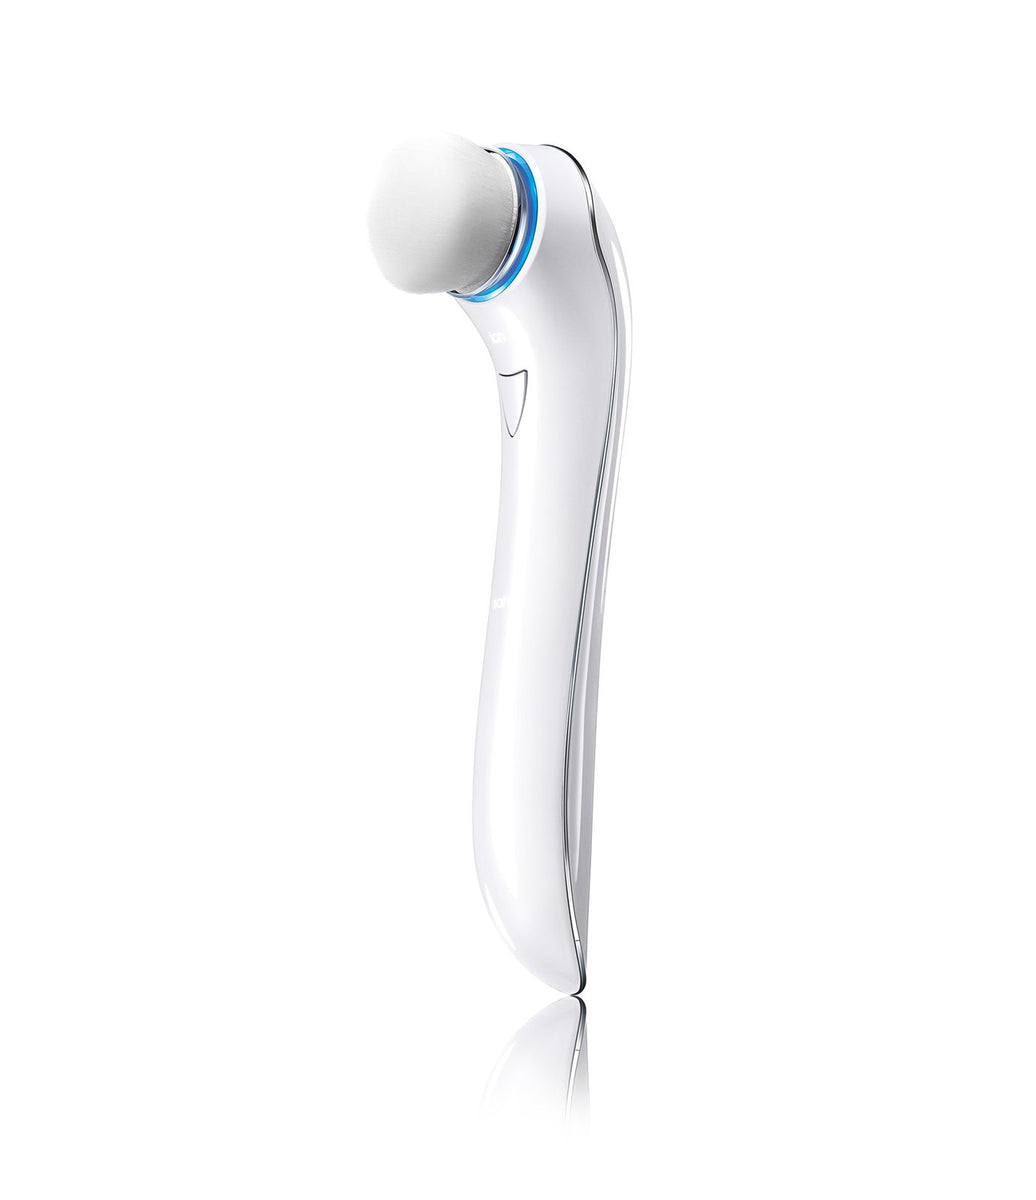 ReFa Ultra Cleansing Duo (New USB Version) (Value: $355)